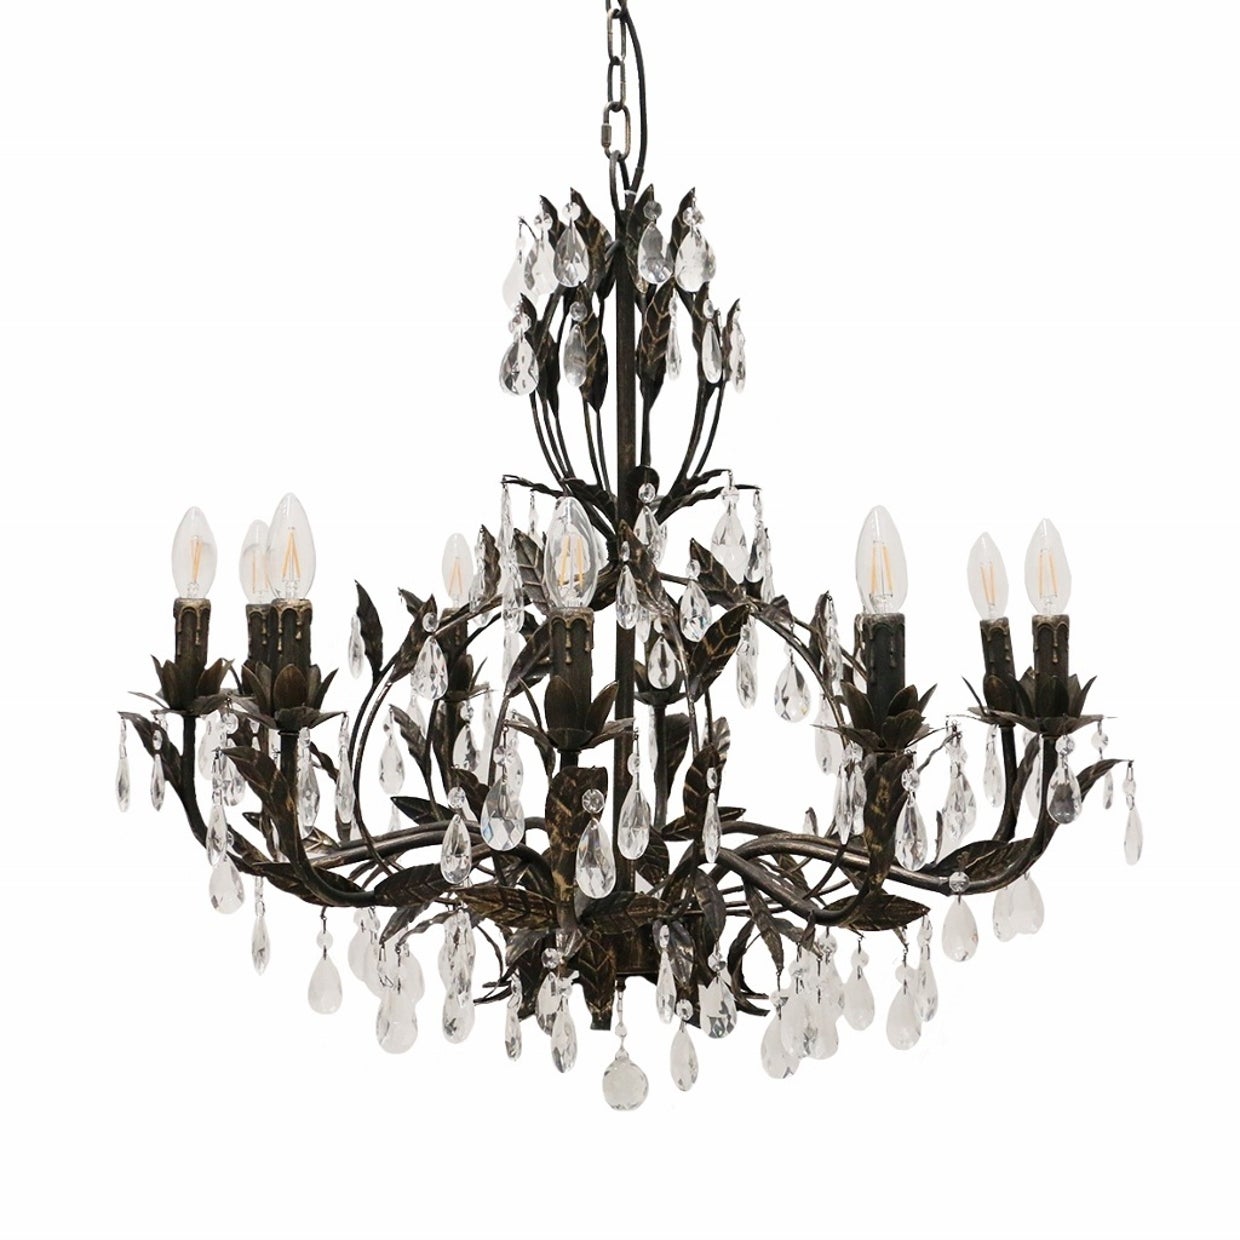 Large Fleurence Chandelier - Black and Gold with Glass Crystals - 10 Light